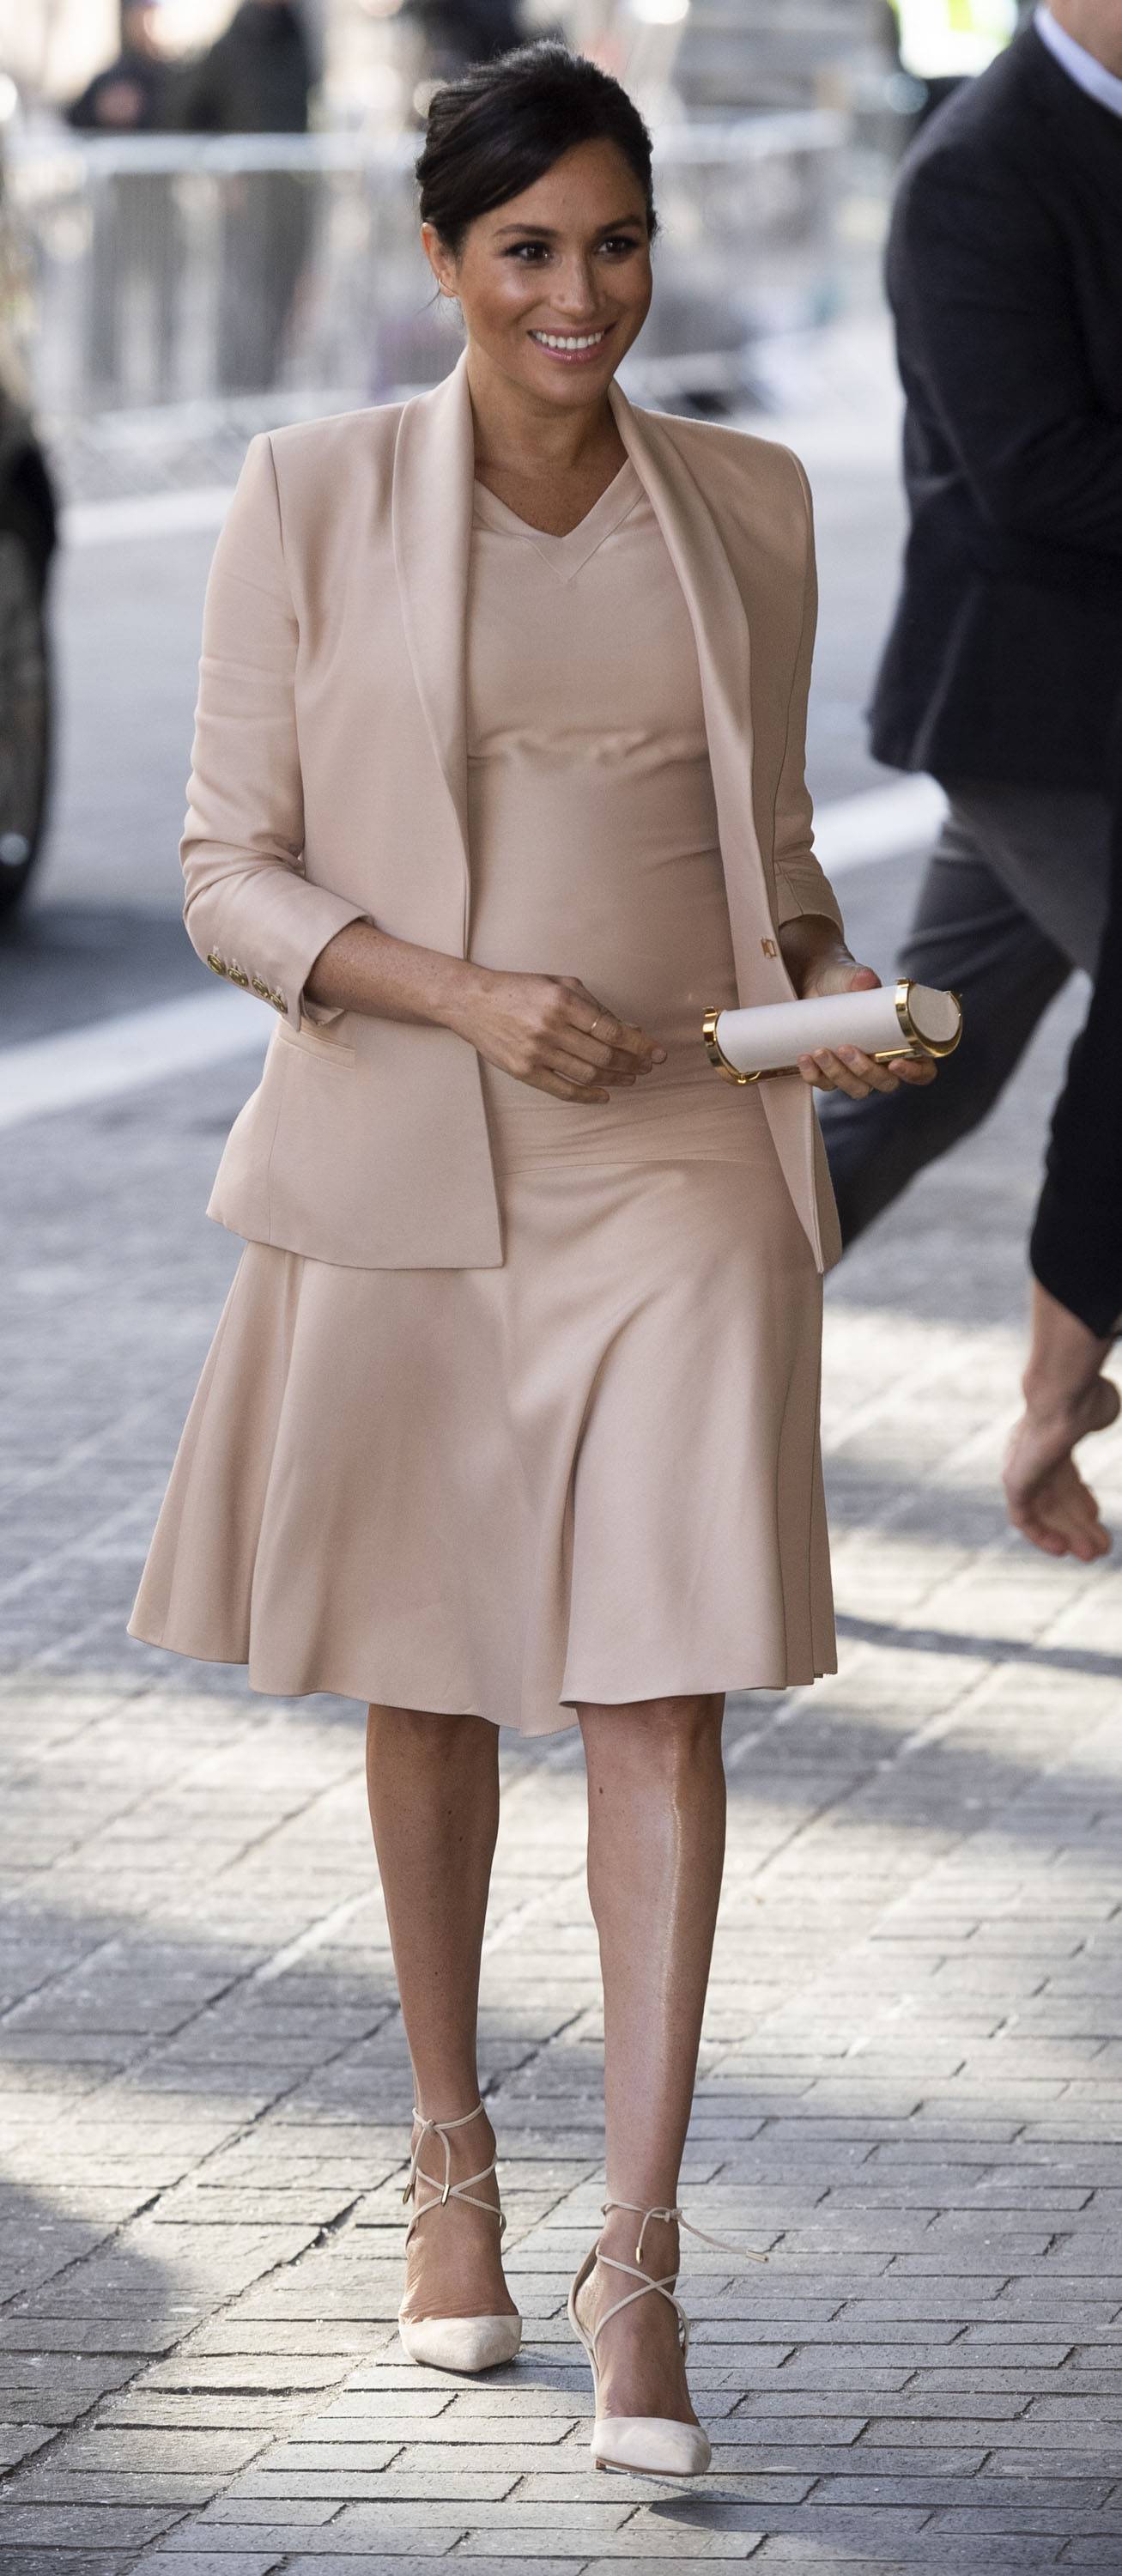 33 Pieces of Style Inspiration Courtesy Of Meghan Markle